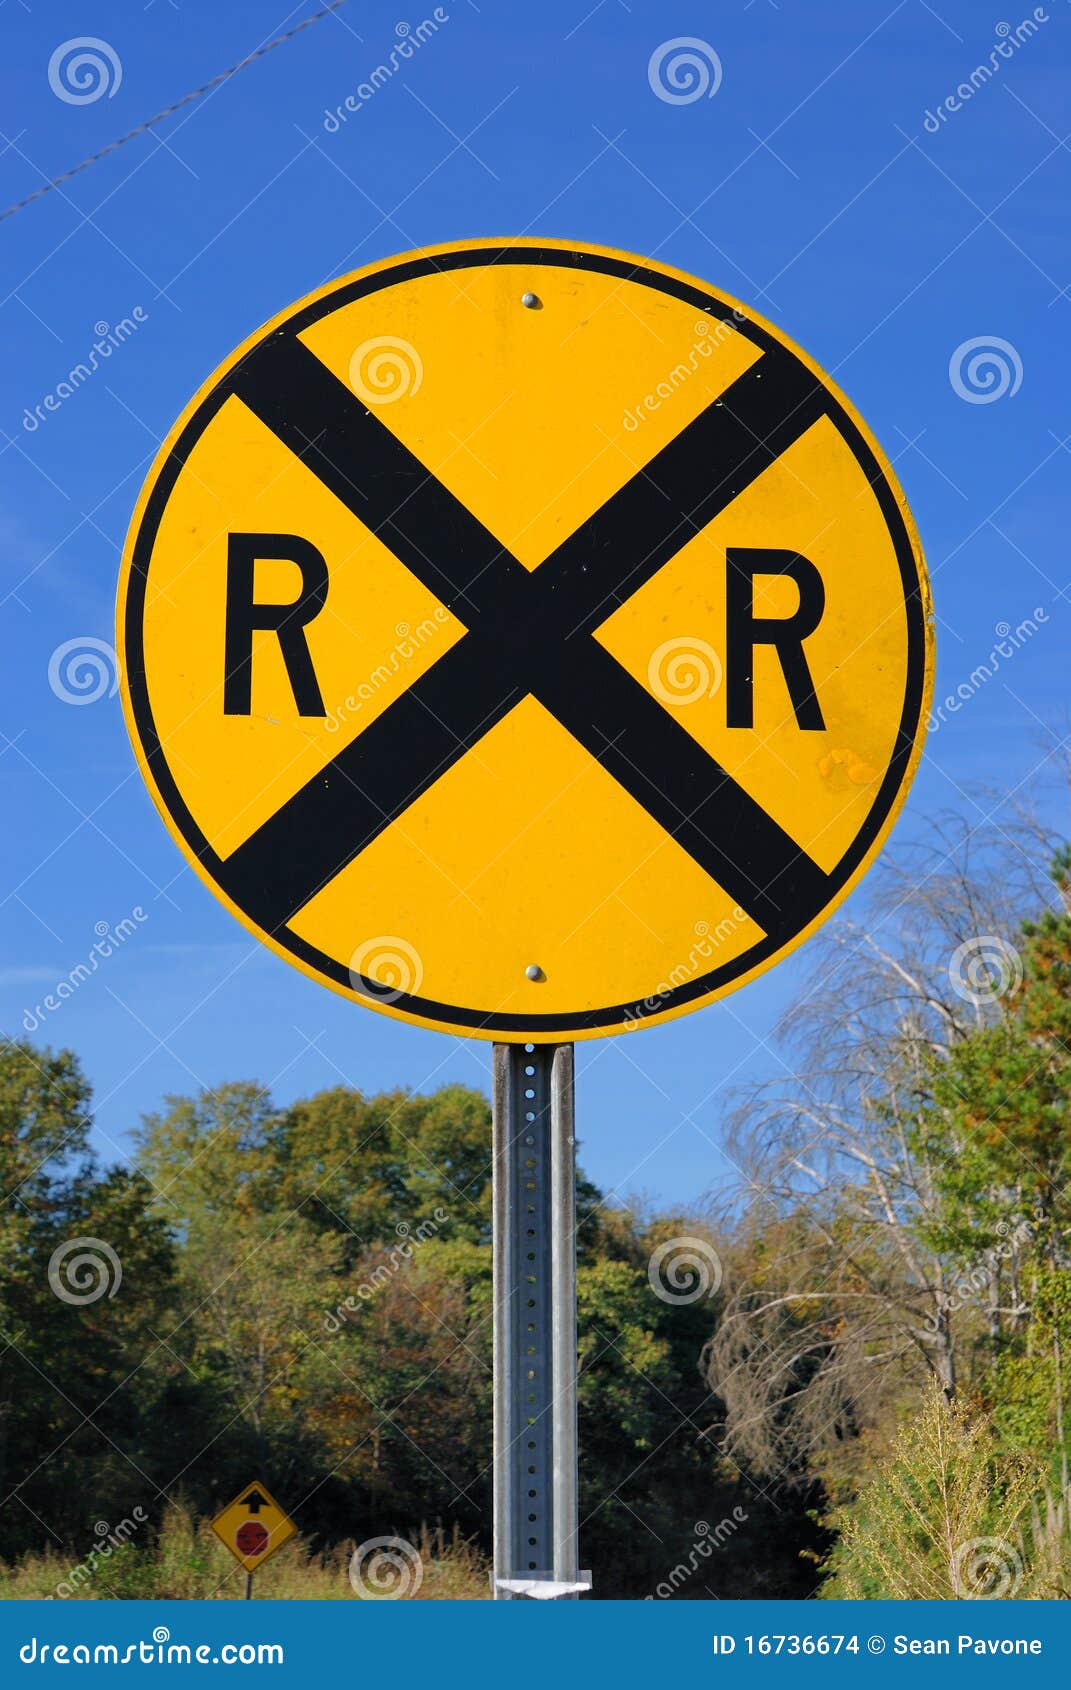 Railroad Crossing Road Sign Stock Images - Image: 16736674